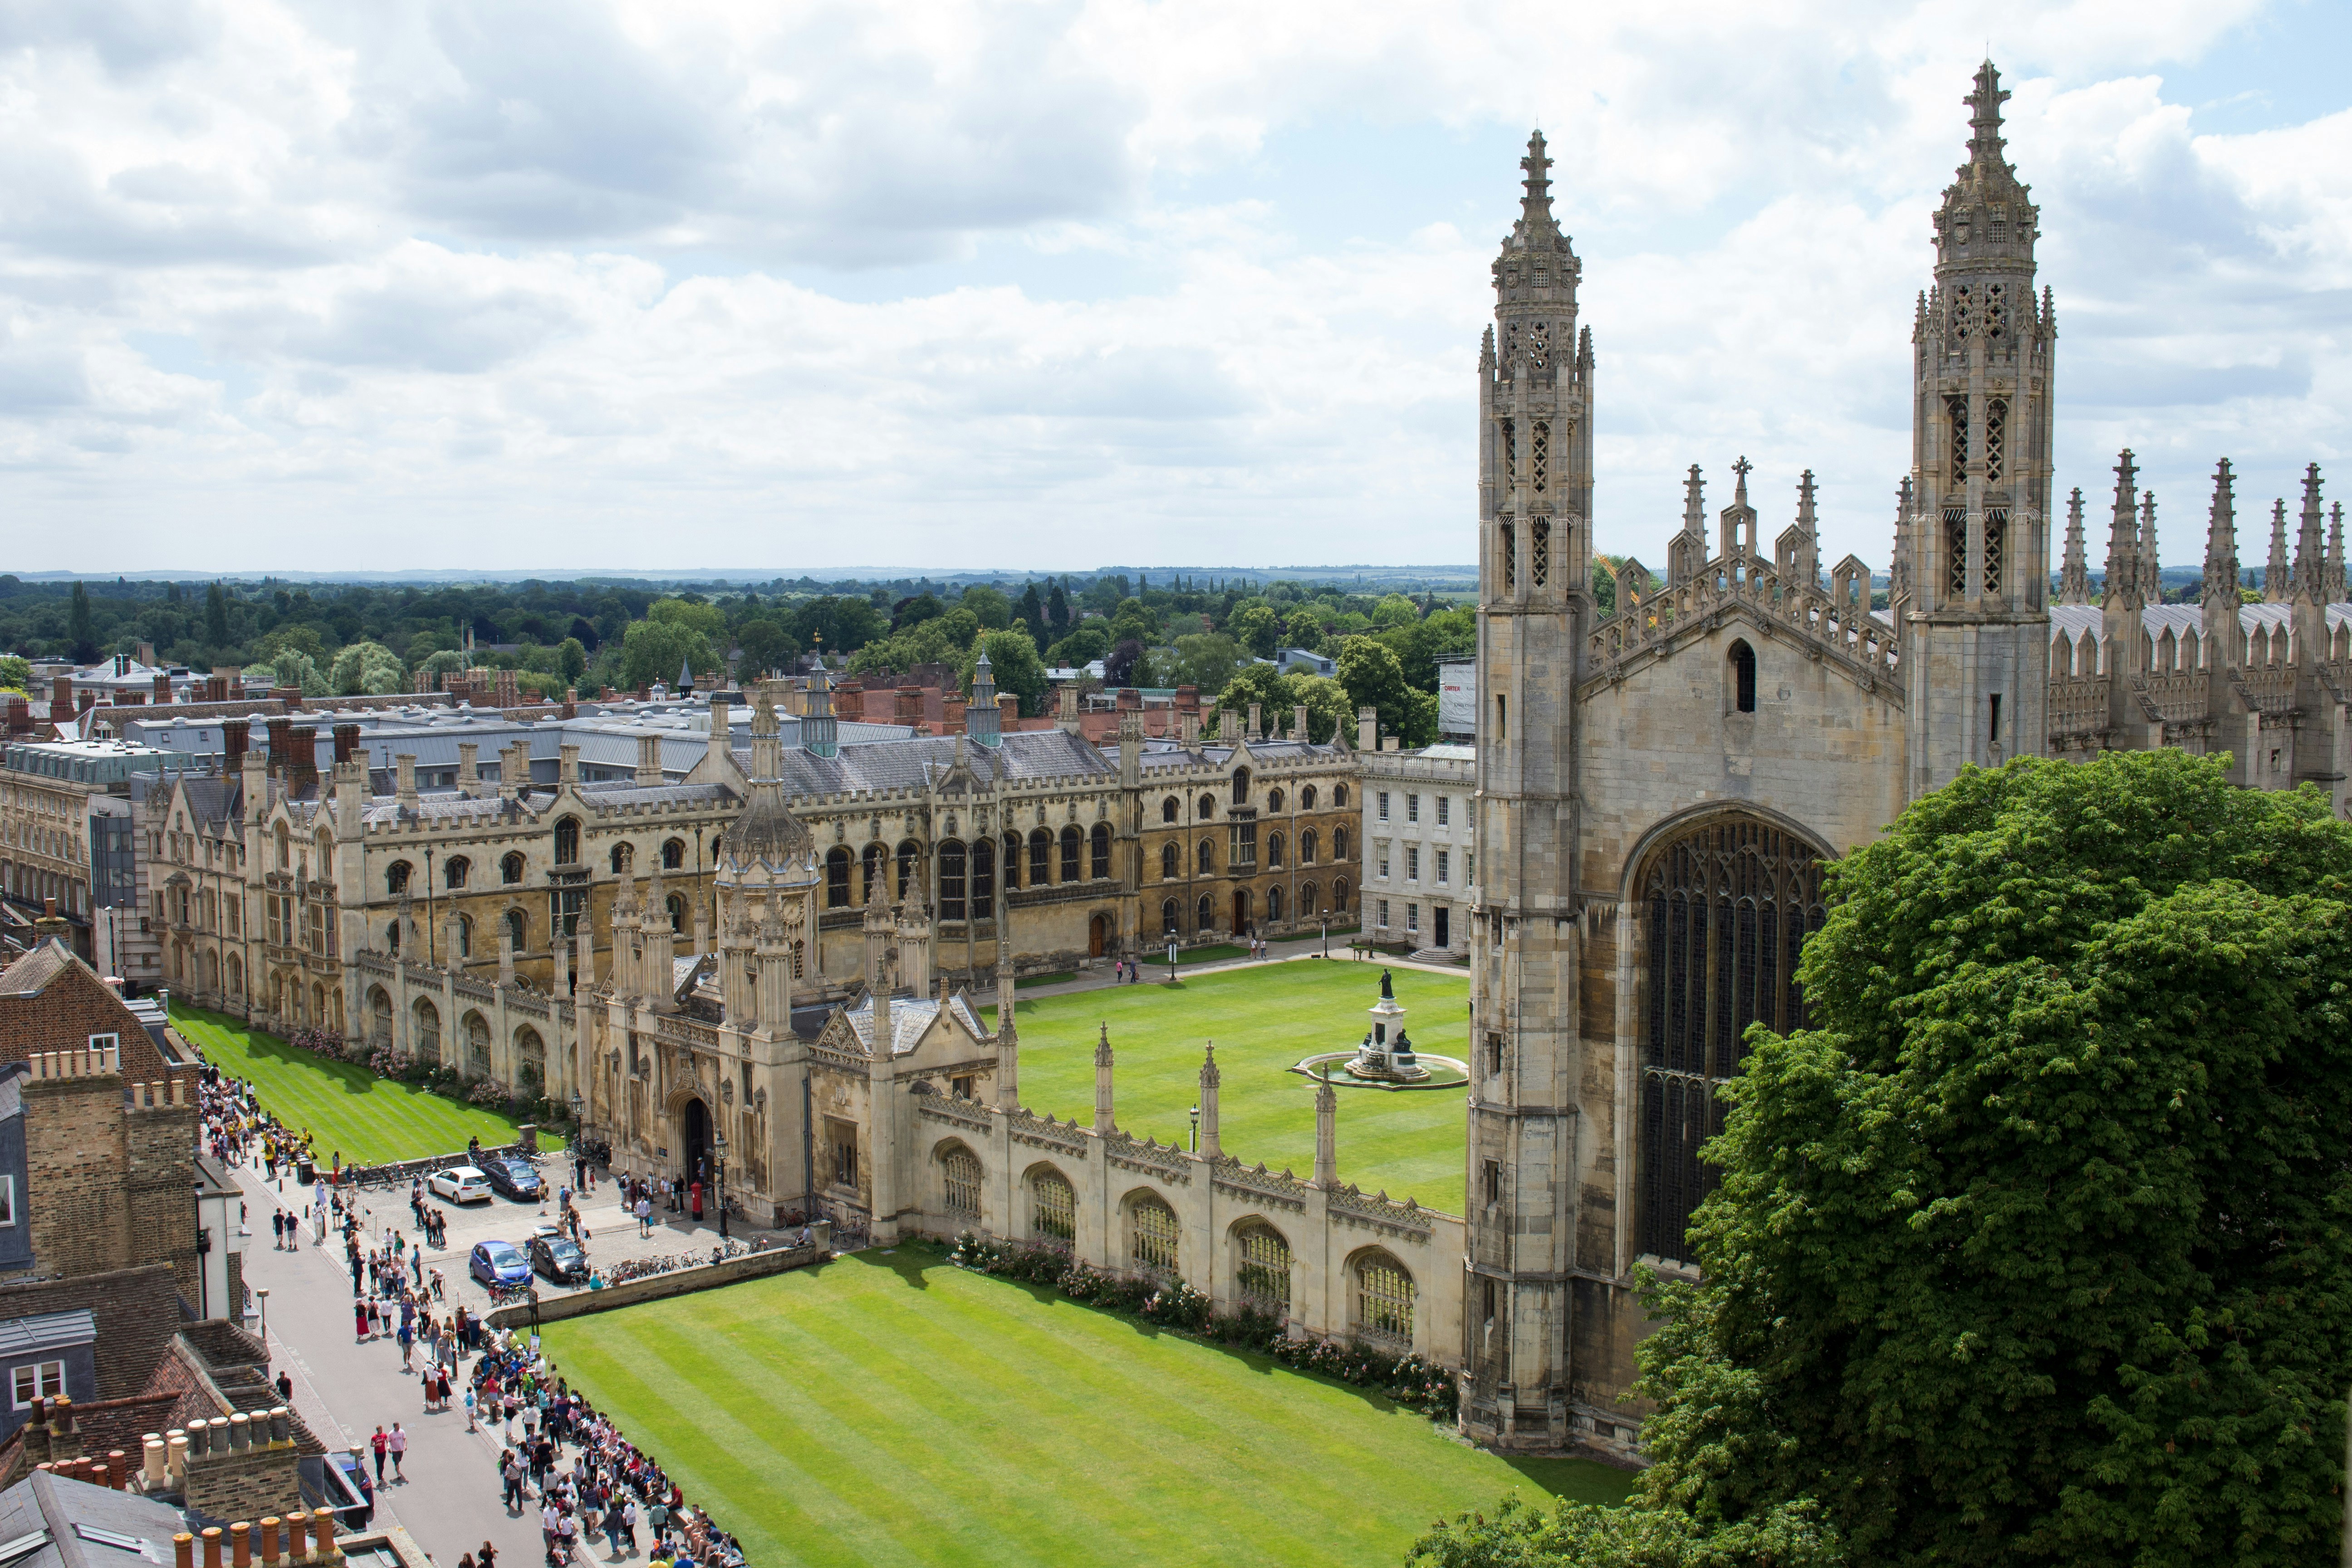 Aerial view of Cambridge University, with its British architecture and green lawns.